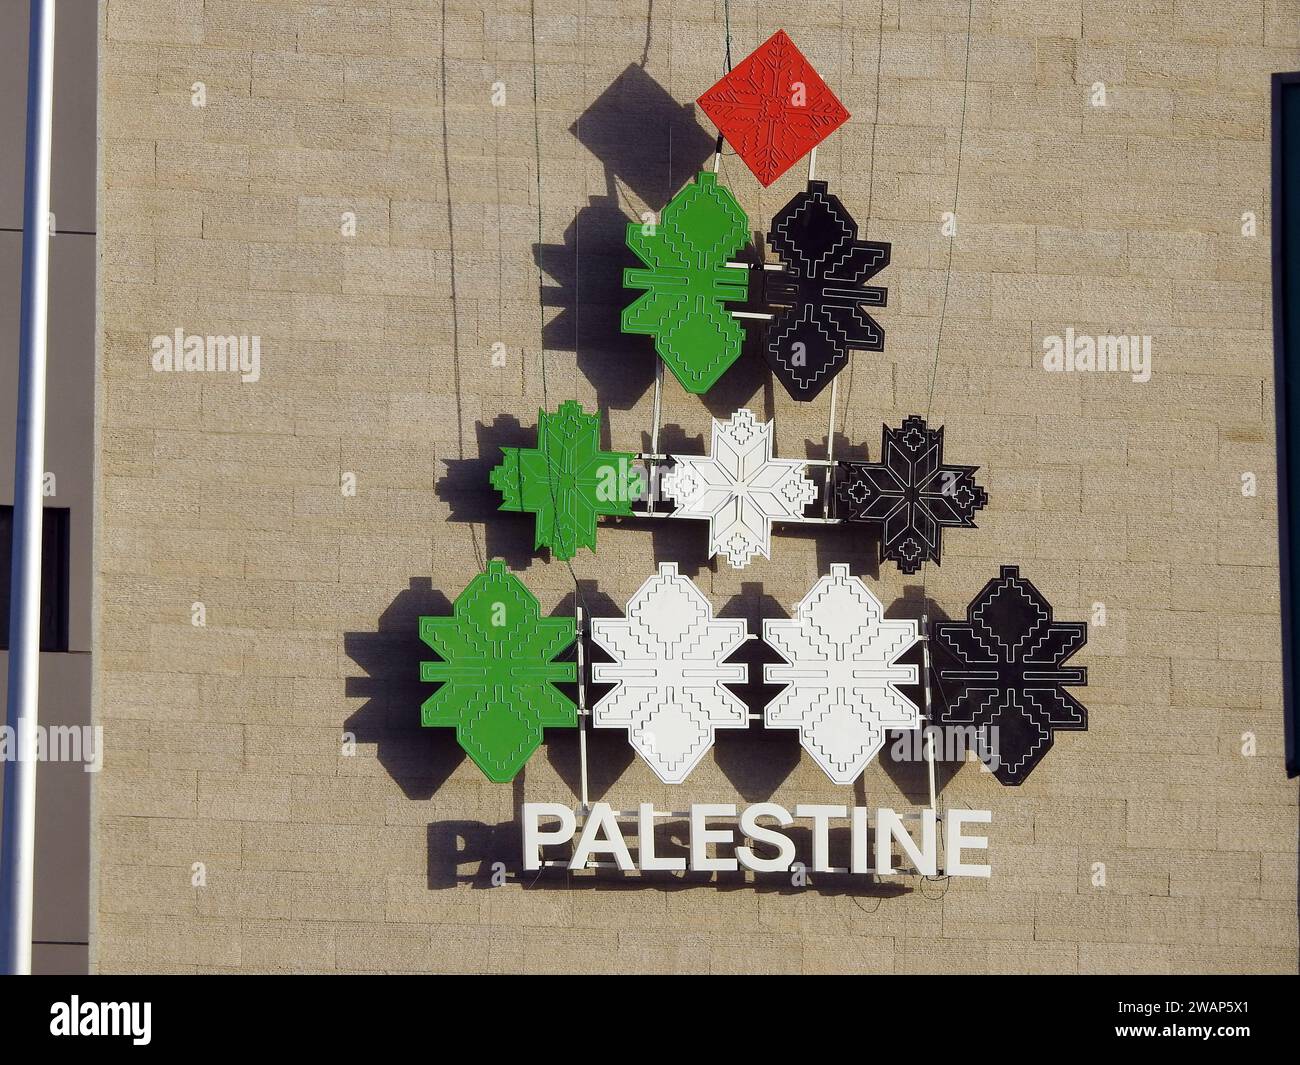 A pyramidal shape with the colors of the Palestinian flag, with the word Palestine below it, An Icon on a building in Egypt for the state of Palestine Stock Photo